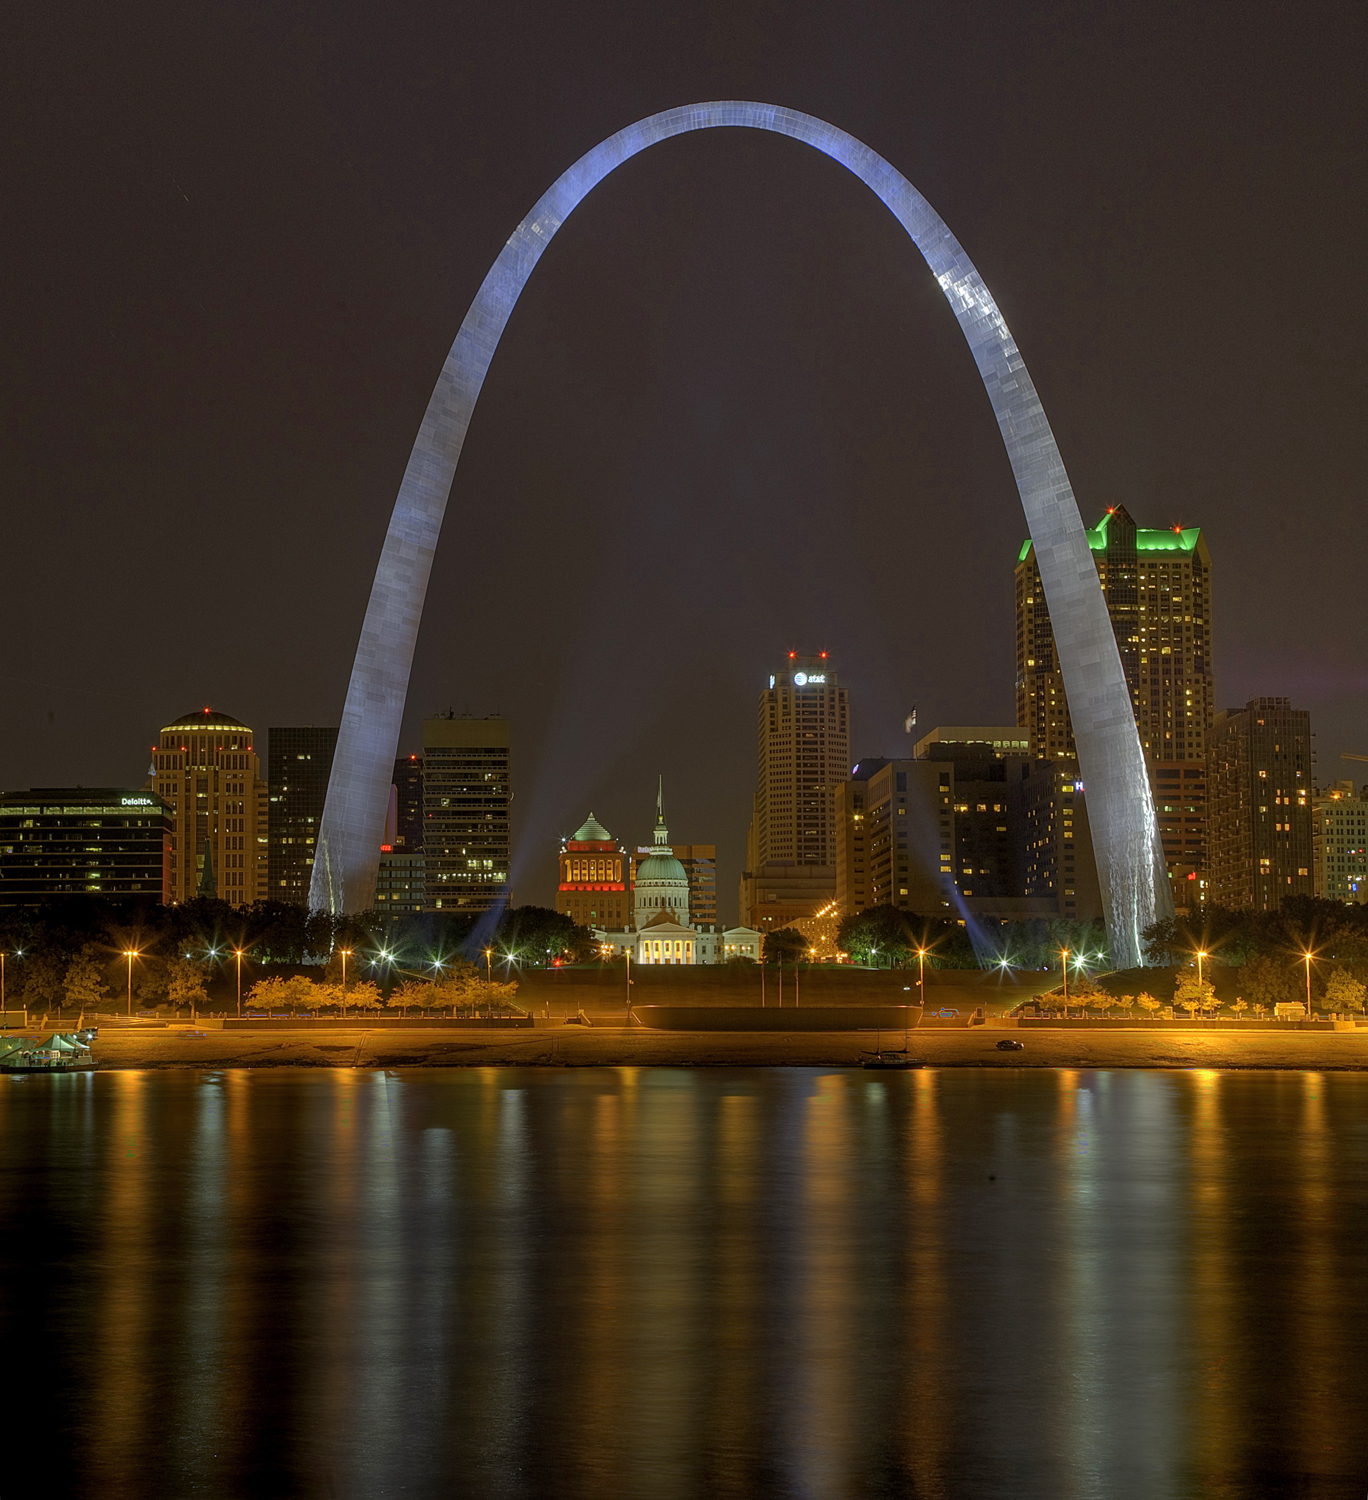 Meet me in St. Louis -- for a most sinful time! - literacybasics.ca